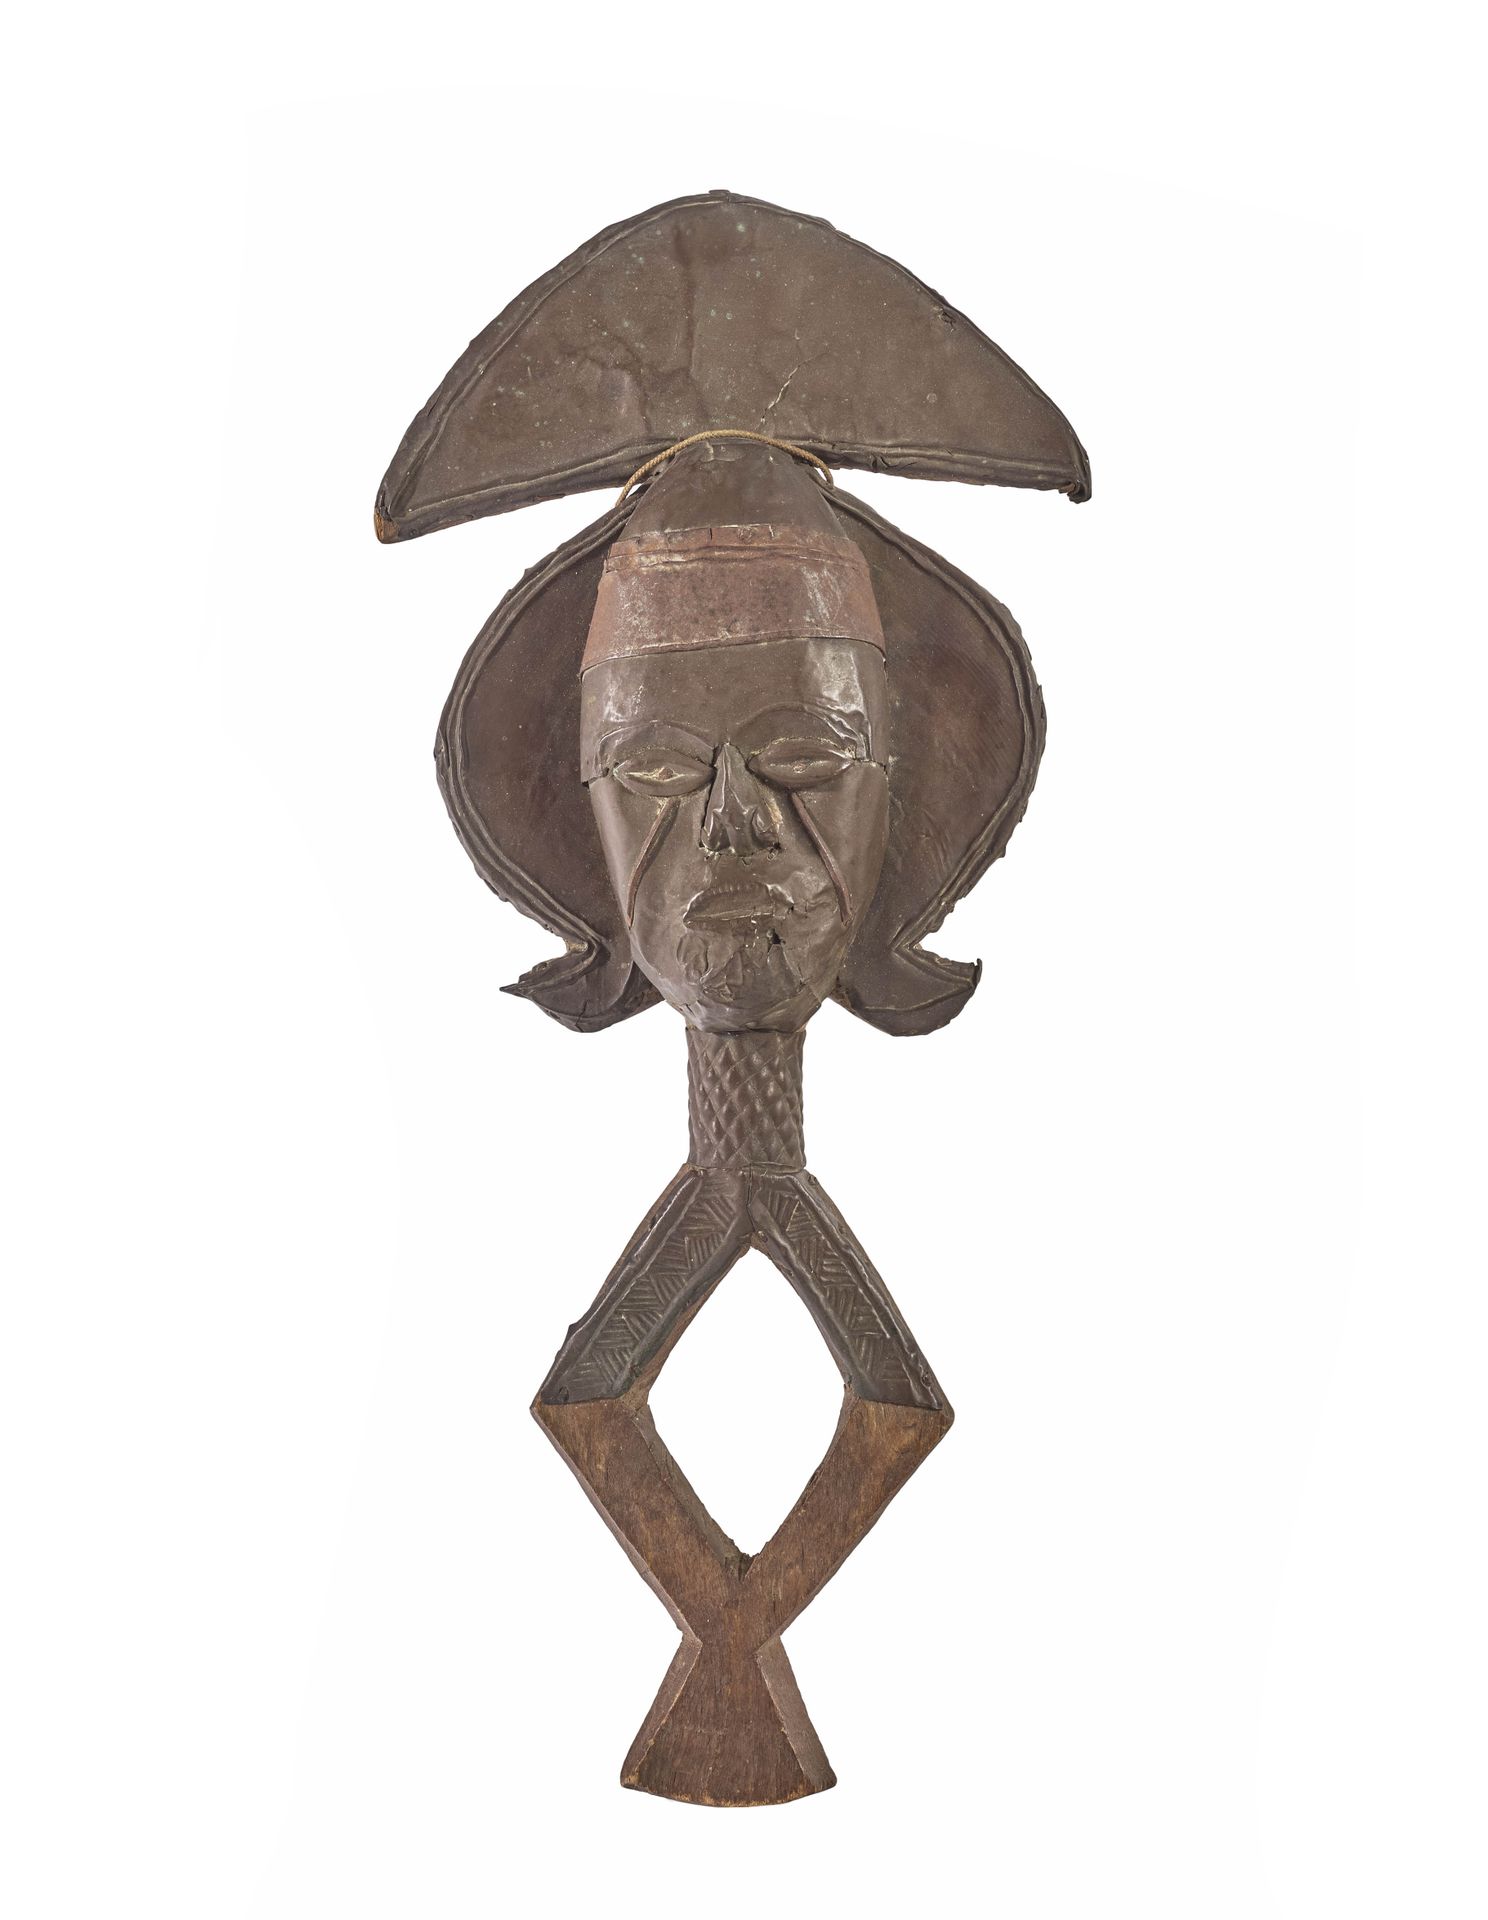 Null Kota, Gabon 

Reliquary figure in wood plated with copper leaves.

H. 54 cm